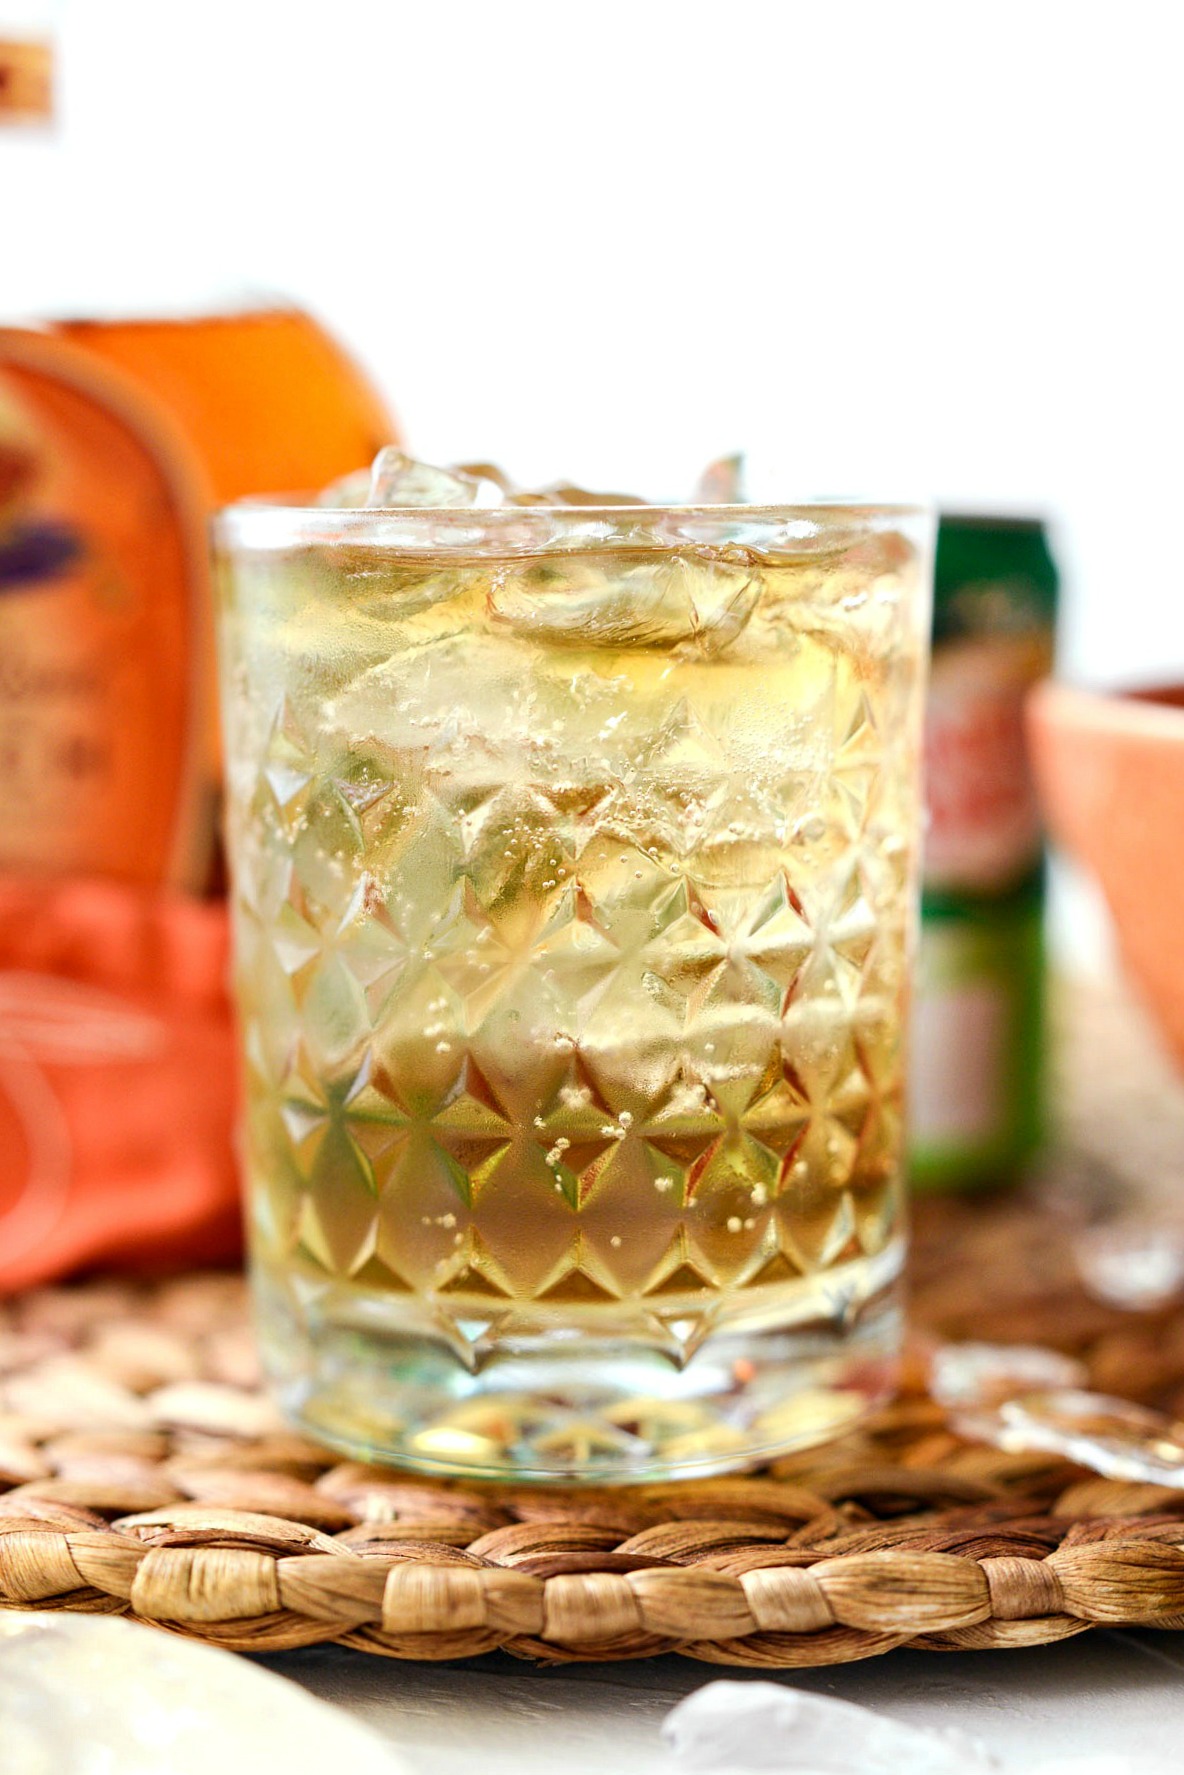 https://www.simplyscratch.com/wp-content/uploads/2020/06/Lewis-Ginger-Peach-Whiskey-Cocktail-l-SimplyScratch.com-gingerale-peachwhiskey-adultbeverage-whiskey-peach-summer-drink-alcoholic-beverage-9-1.jpg